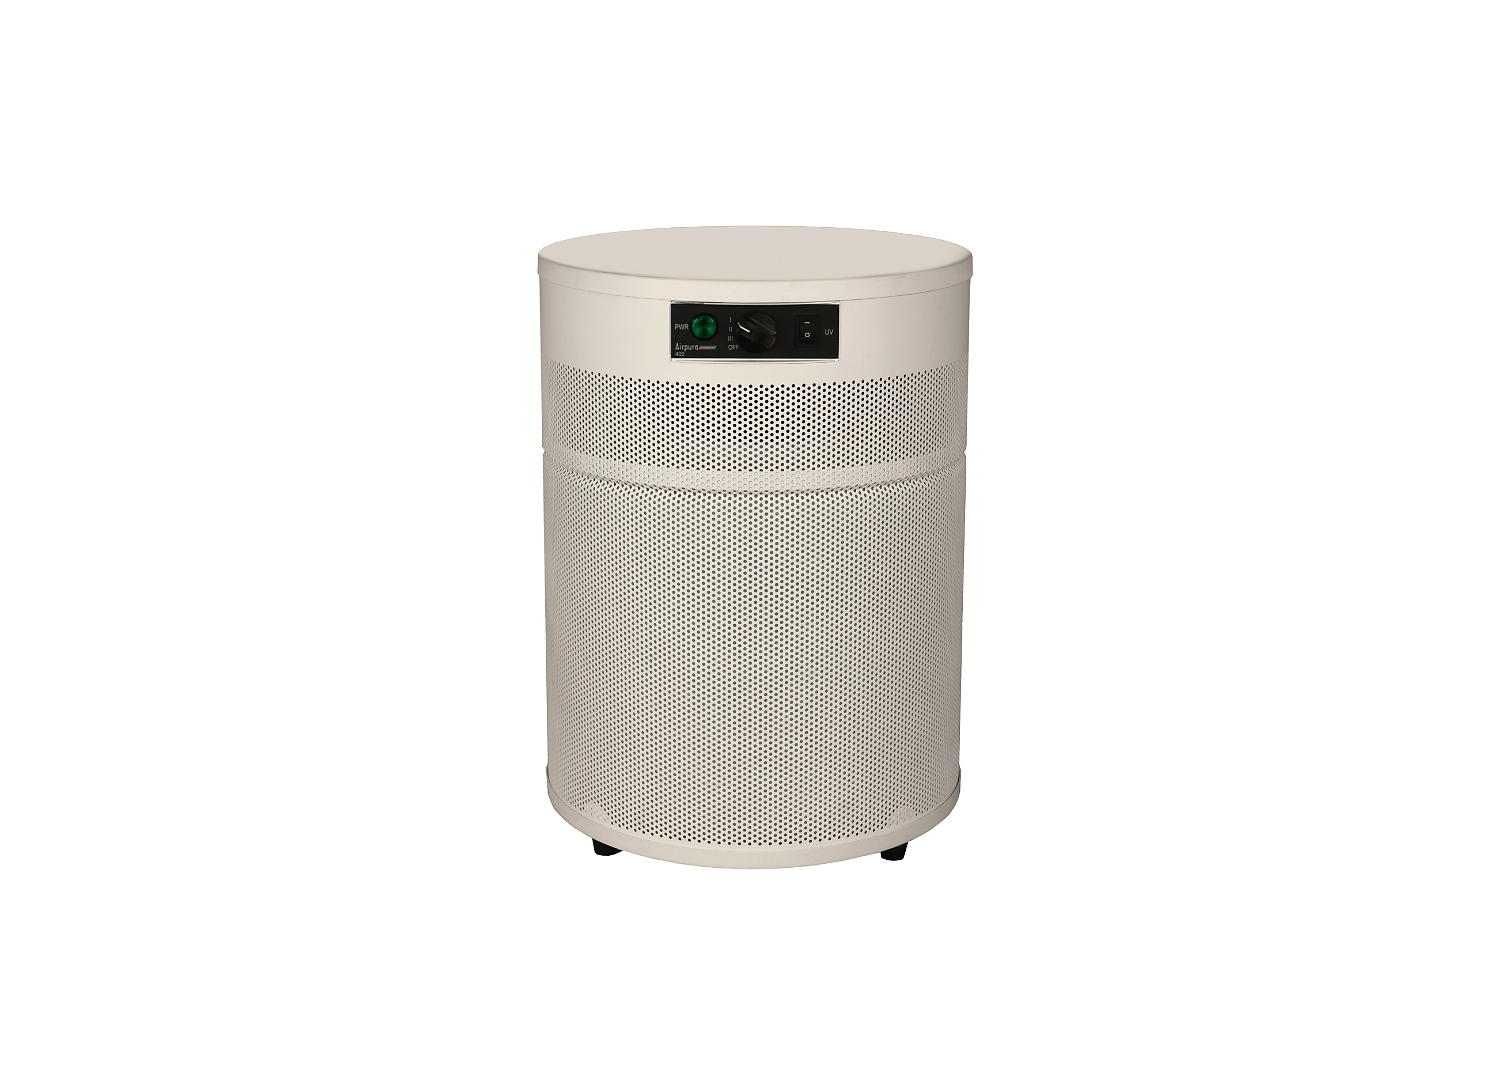 Airpura V400 Compact For Chemicals, VOCS & Particles, Covers 1000 Sq. Ft.